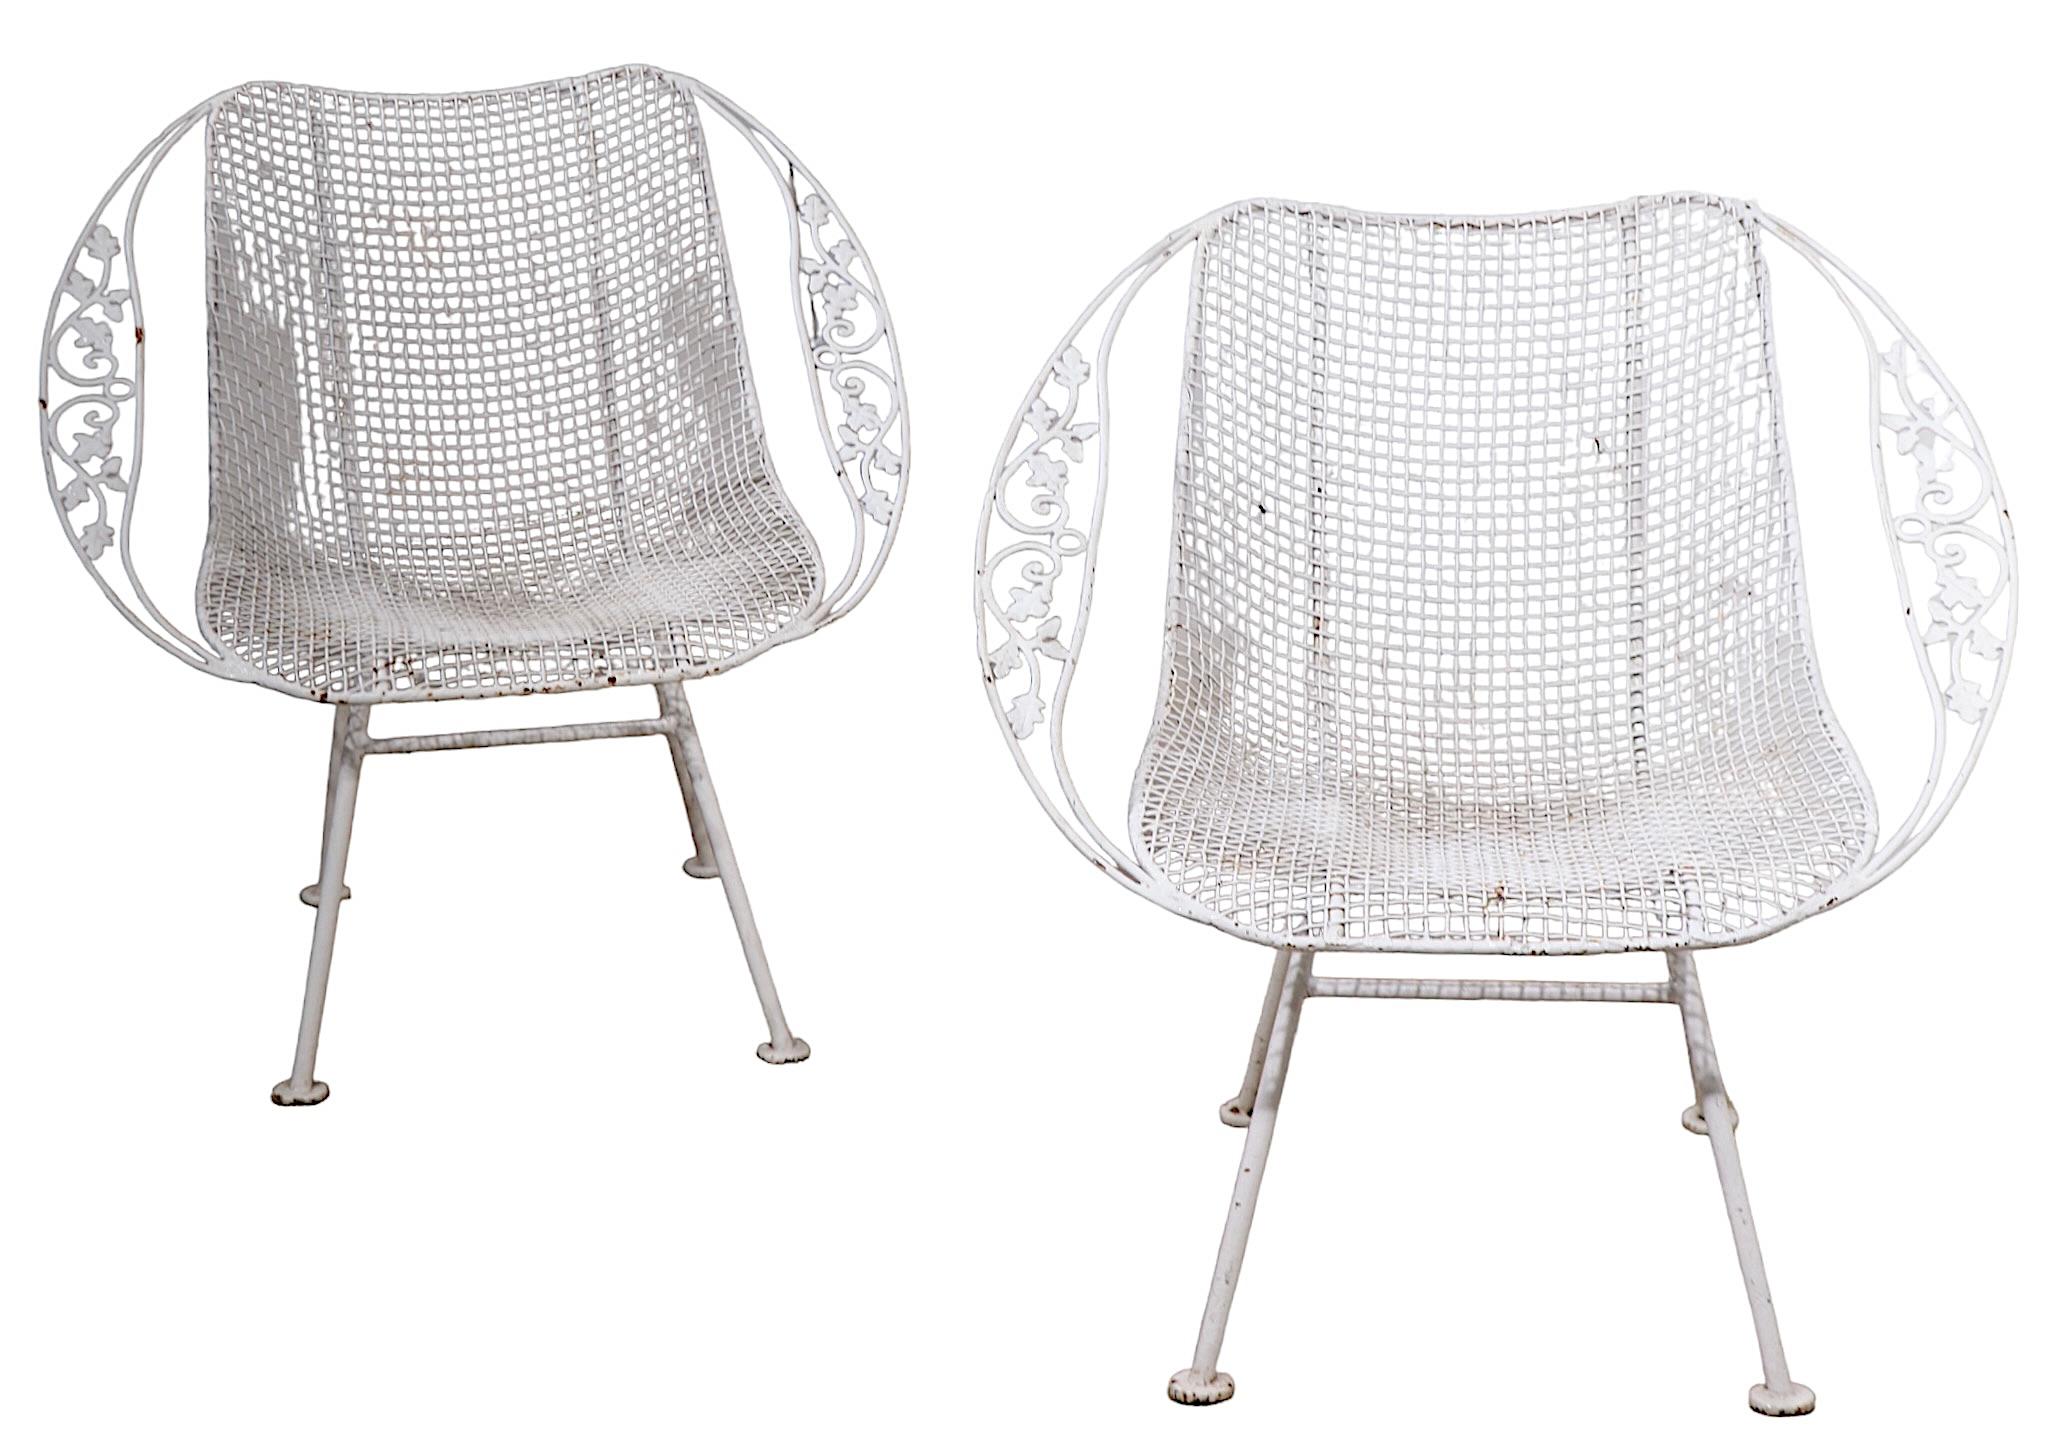 Mid-Century Modern Pr. Sculptura Chantilly Rose Wrought Iron Chairs by Woodard c. 1950's For Sale